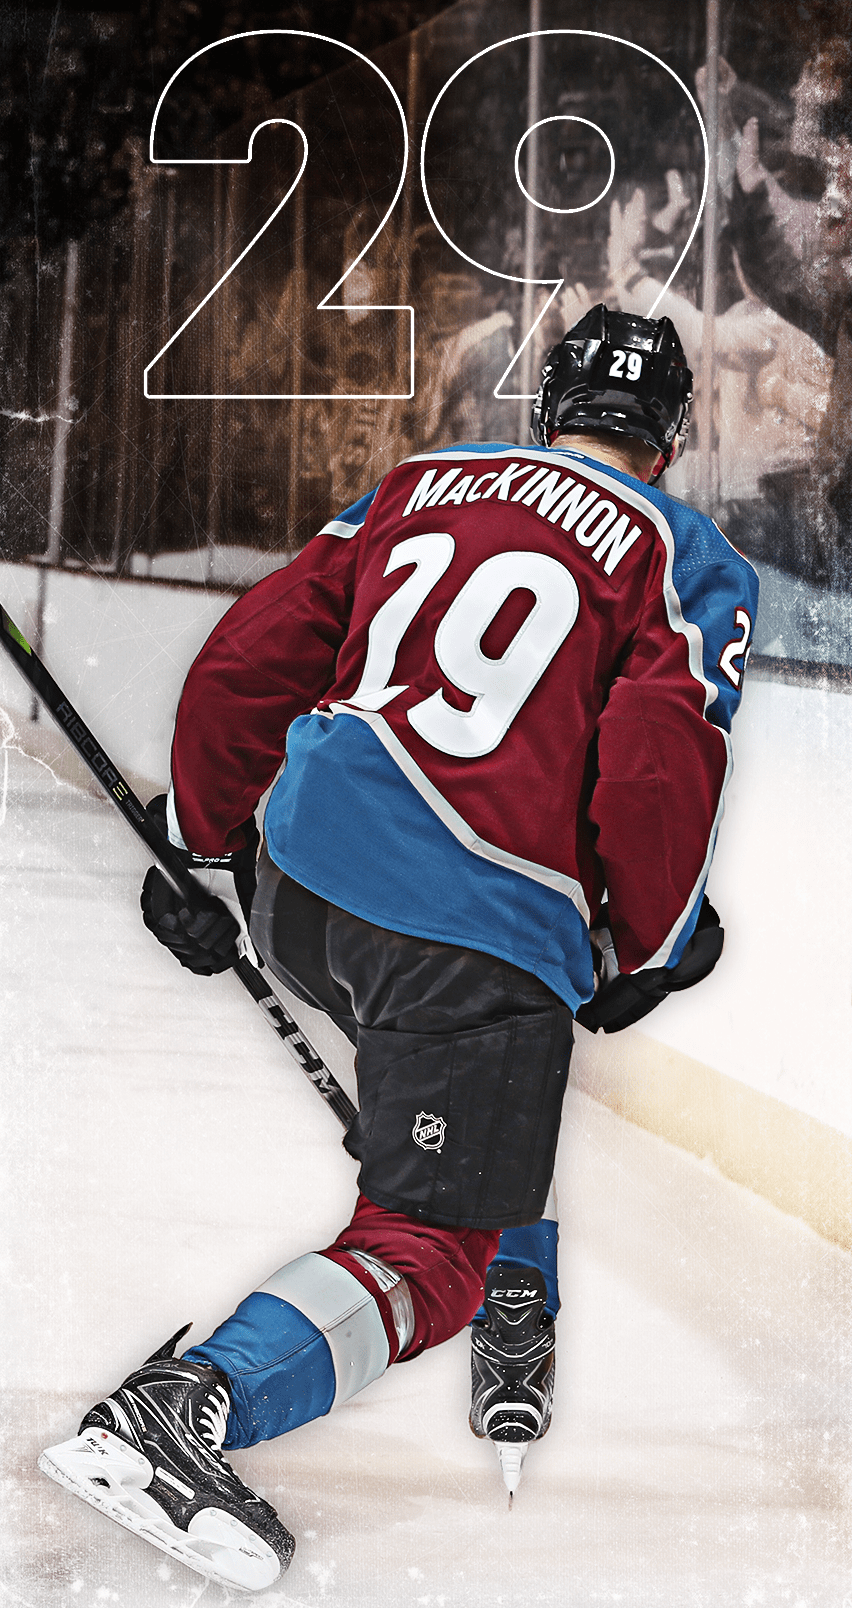 Colorado Avalanche on Twitter If you like Colorado These are sick If  you like the Avs These are sick If you just want a new wallpaper There  are SICK WallpaperWednesday GoAvsGo httpstcovX6zCm28nG 